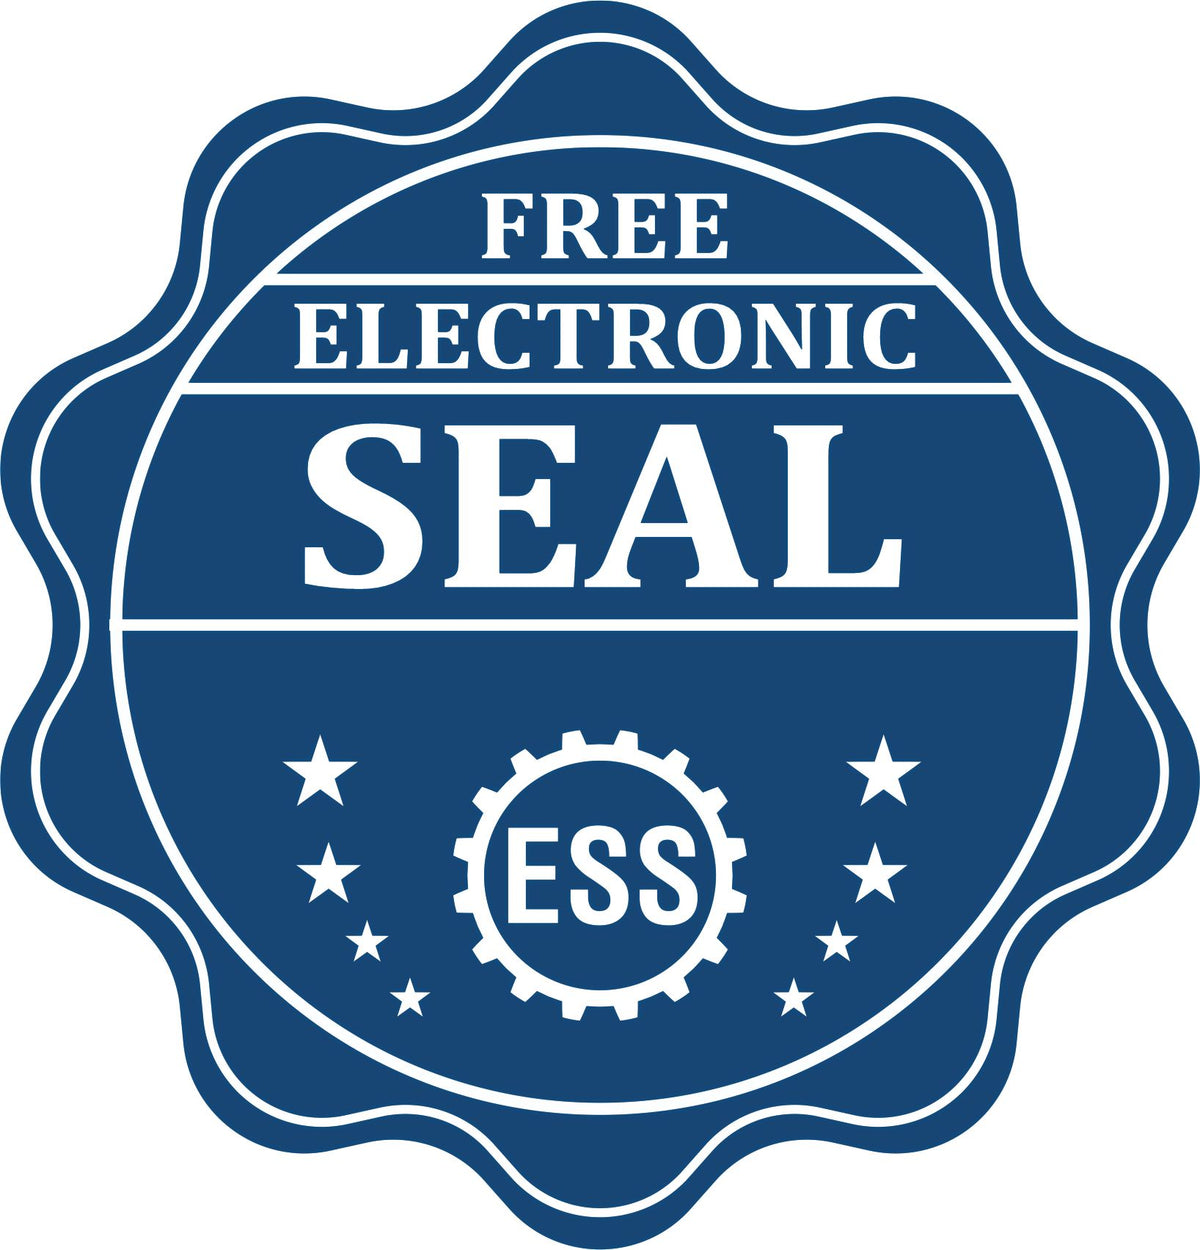 A badge showing a free electronic seal for the Long Reach Alaska PE Seal with stars and the ESS gear on the emblem.